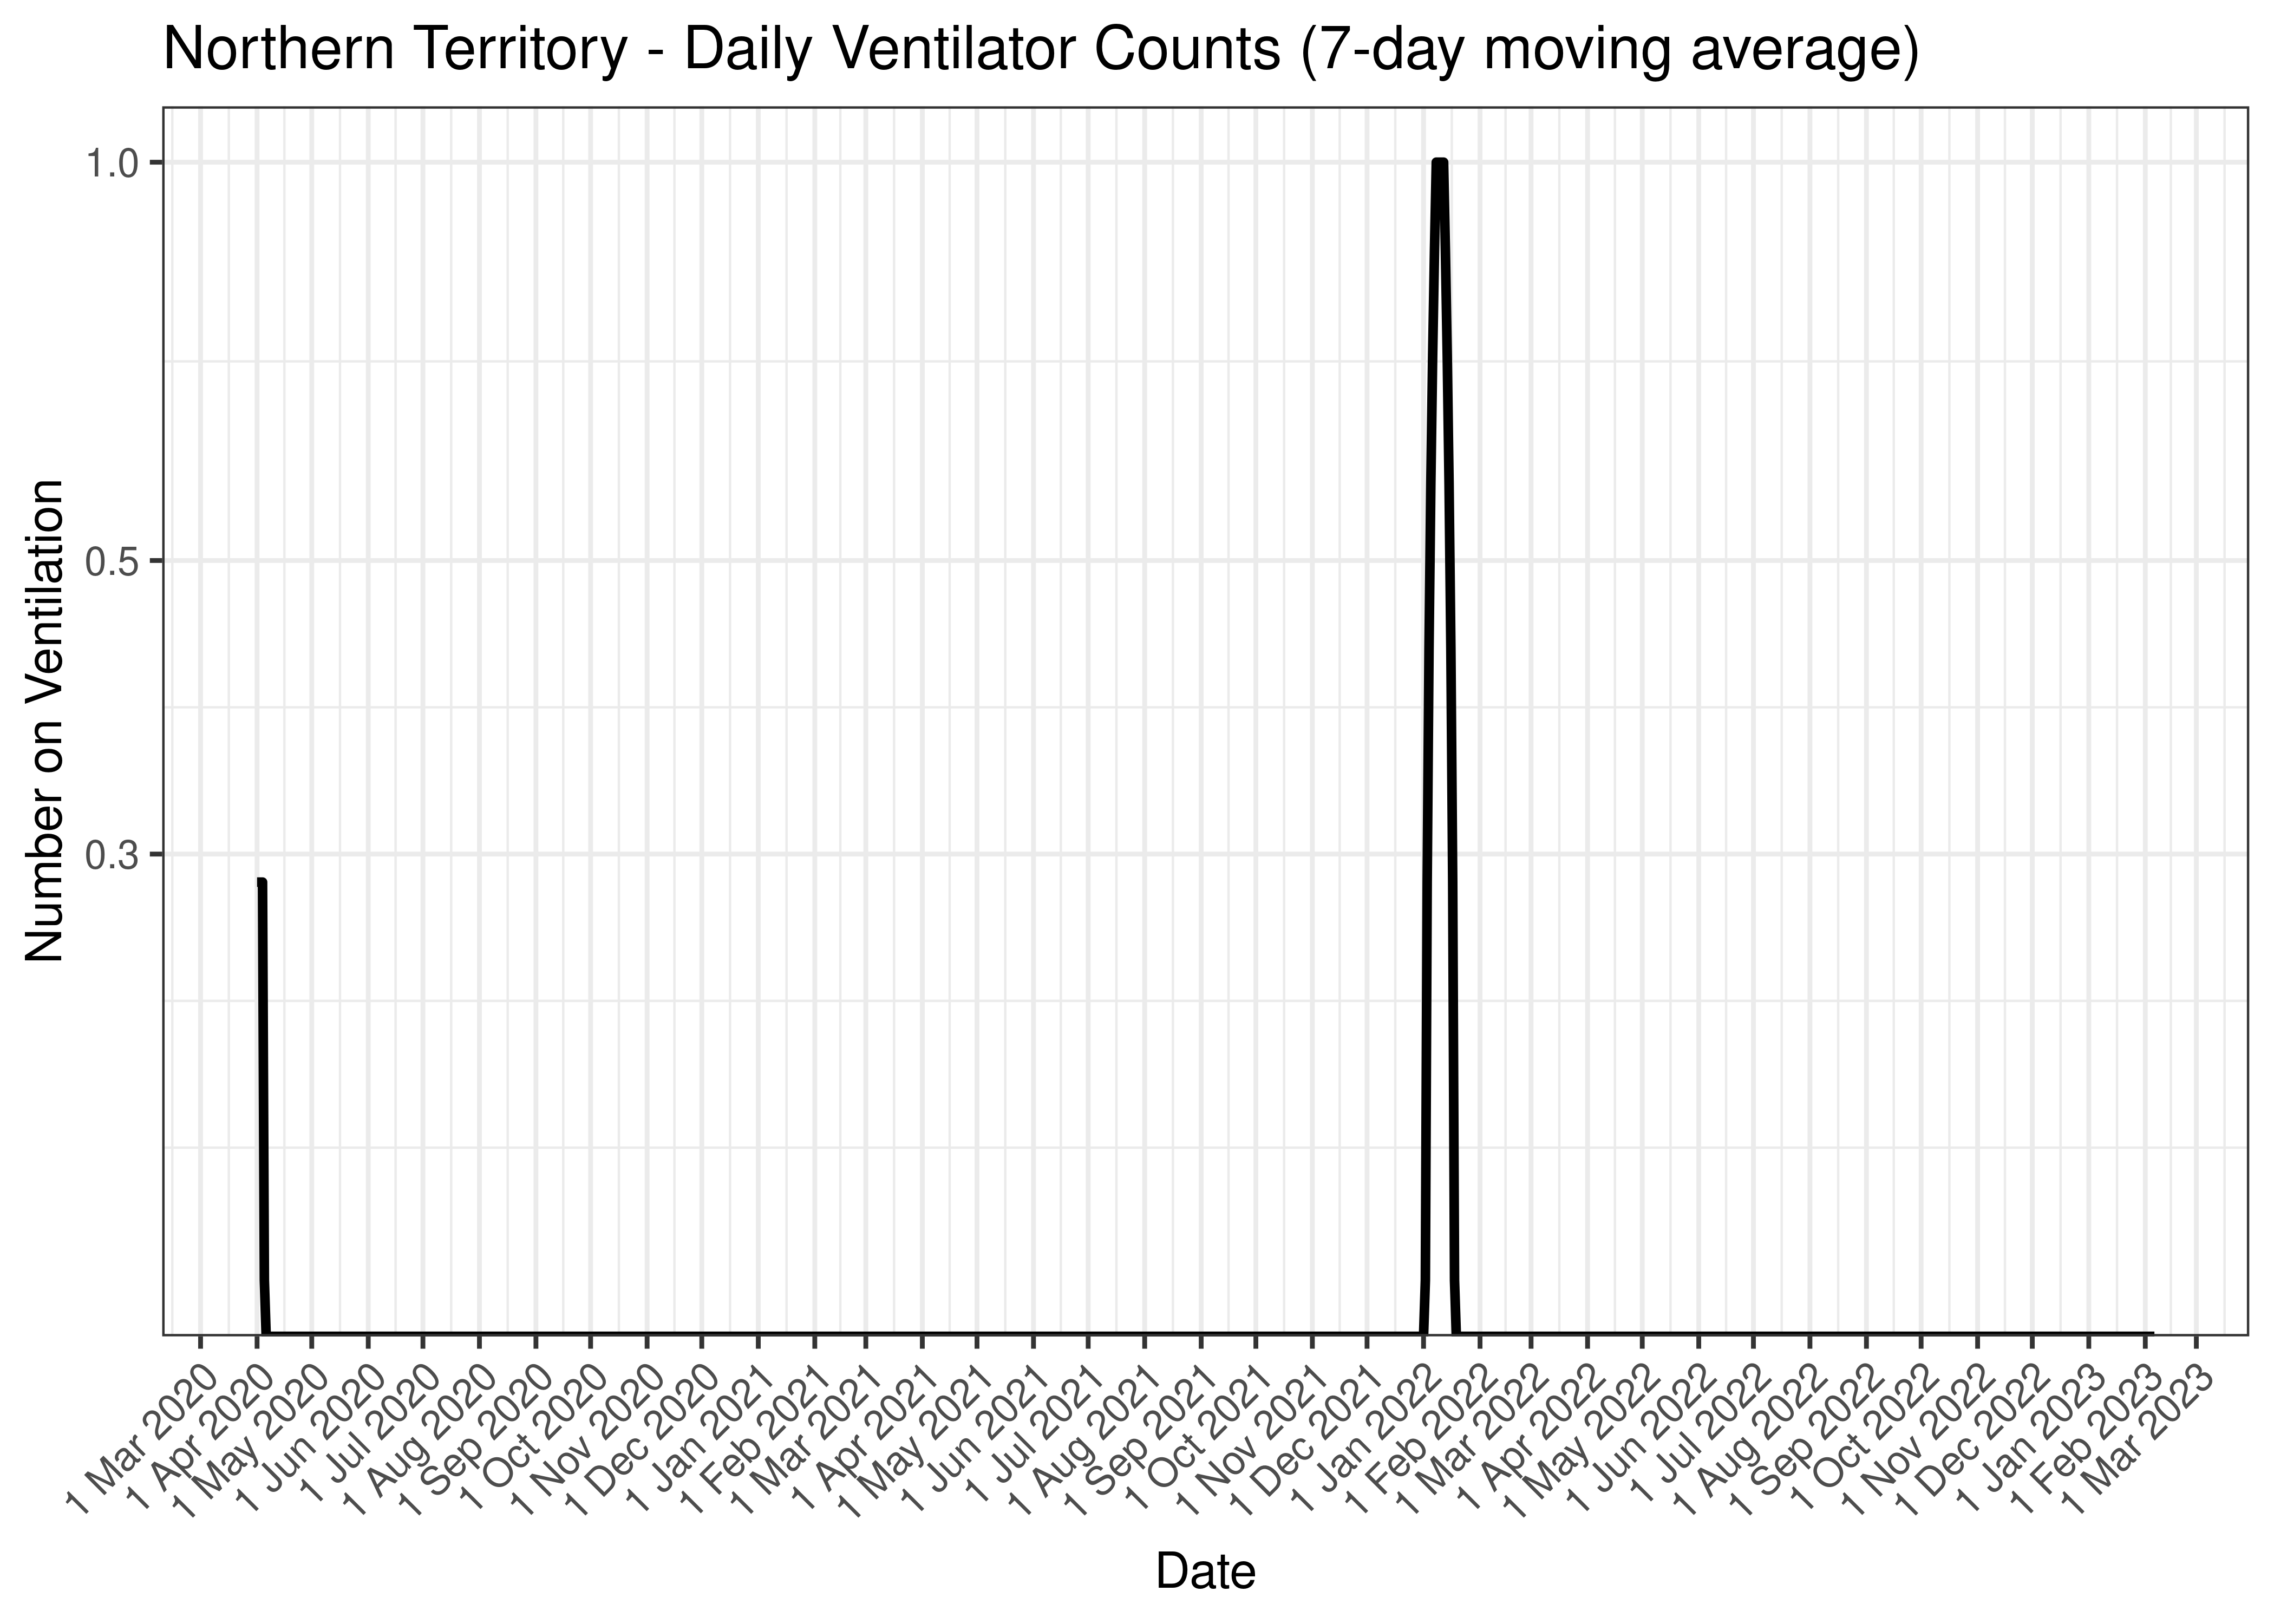 Northern Territory - Daily Ventilator Counts (7-day moving average)